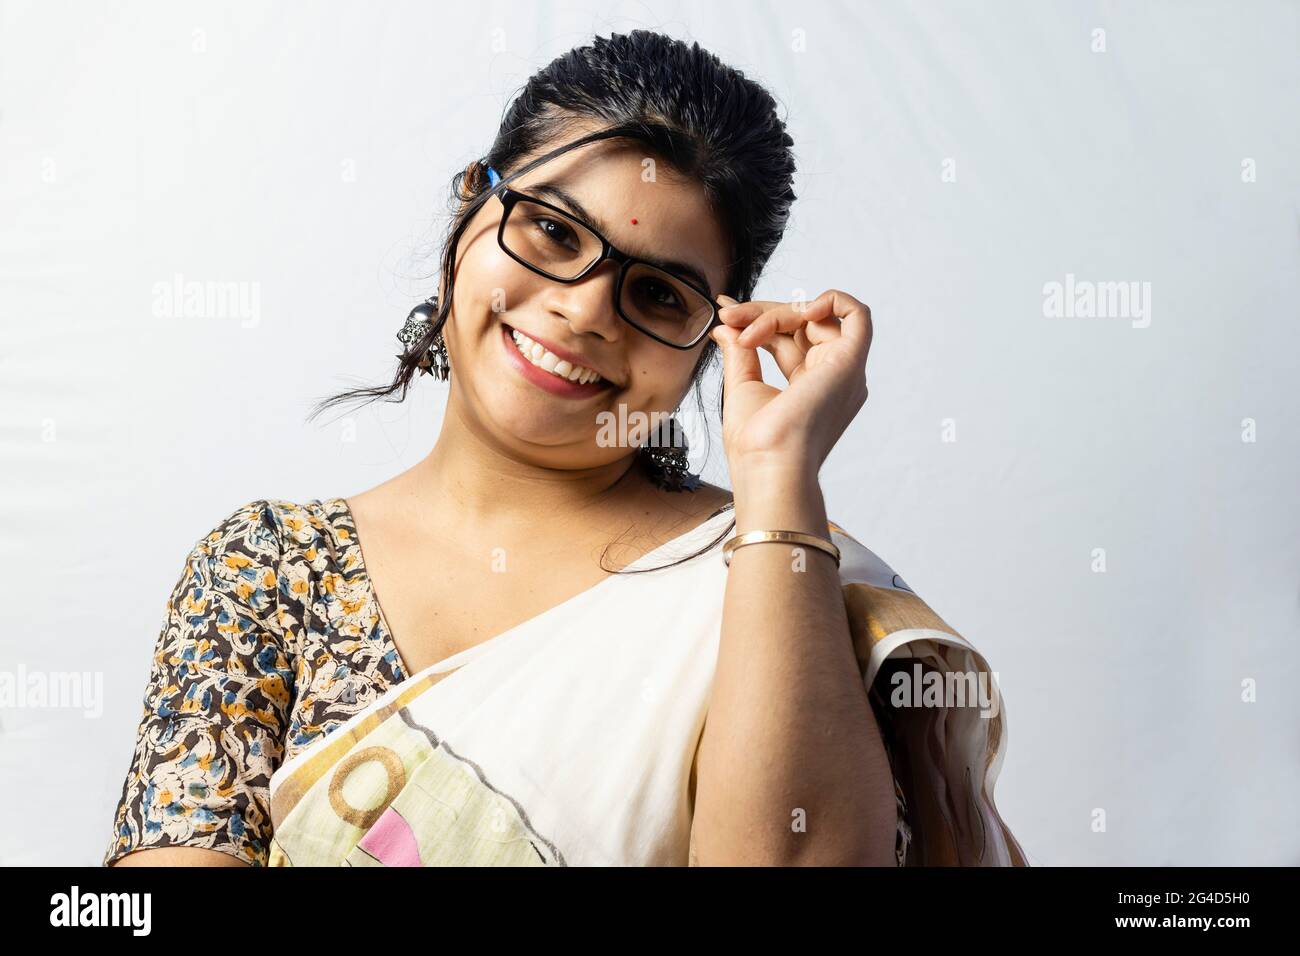 Isolated on white background an Indian office woman in saree posing with her eyeglasses Stock Photo